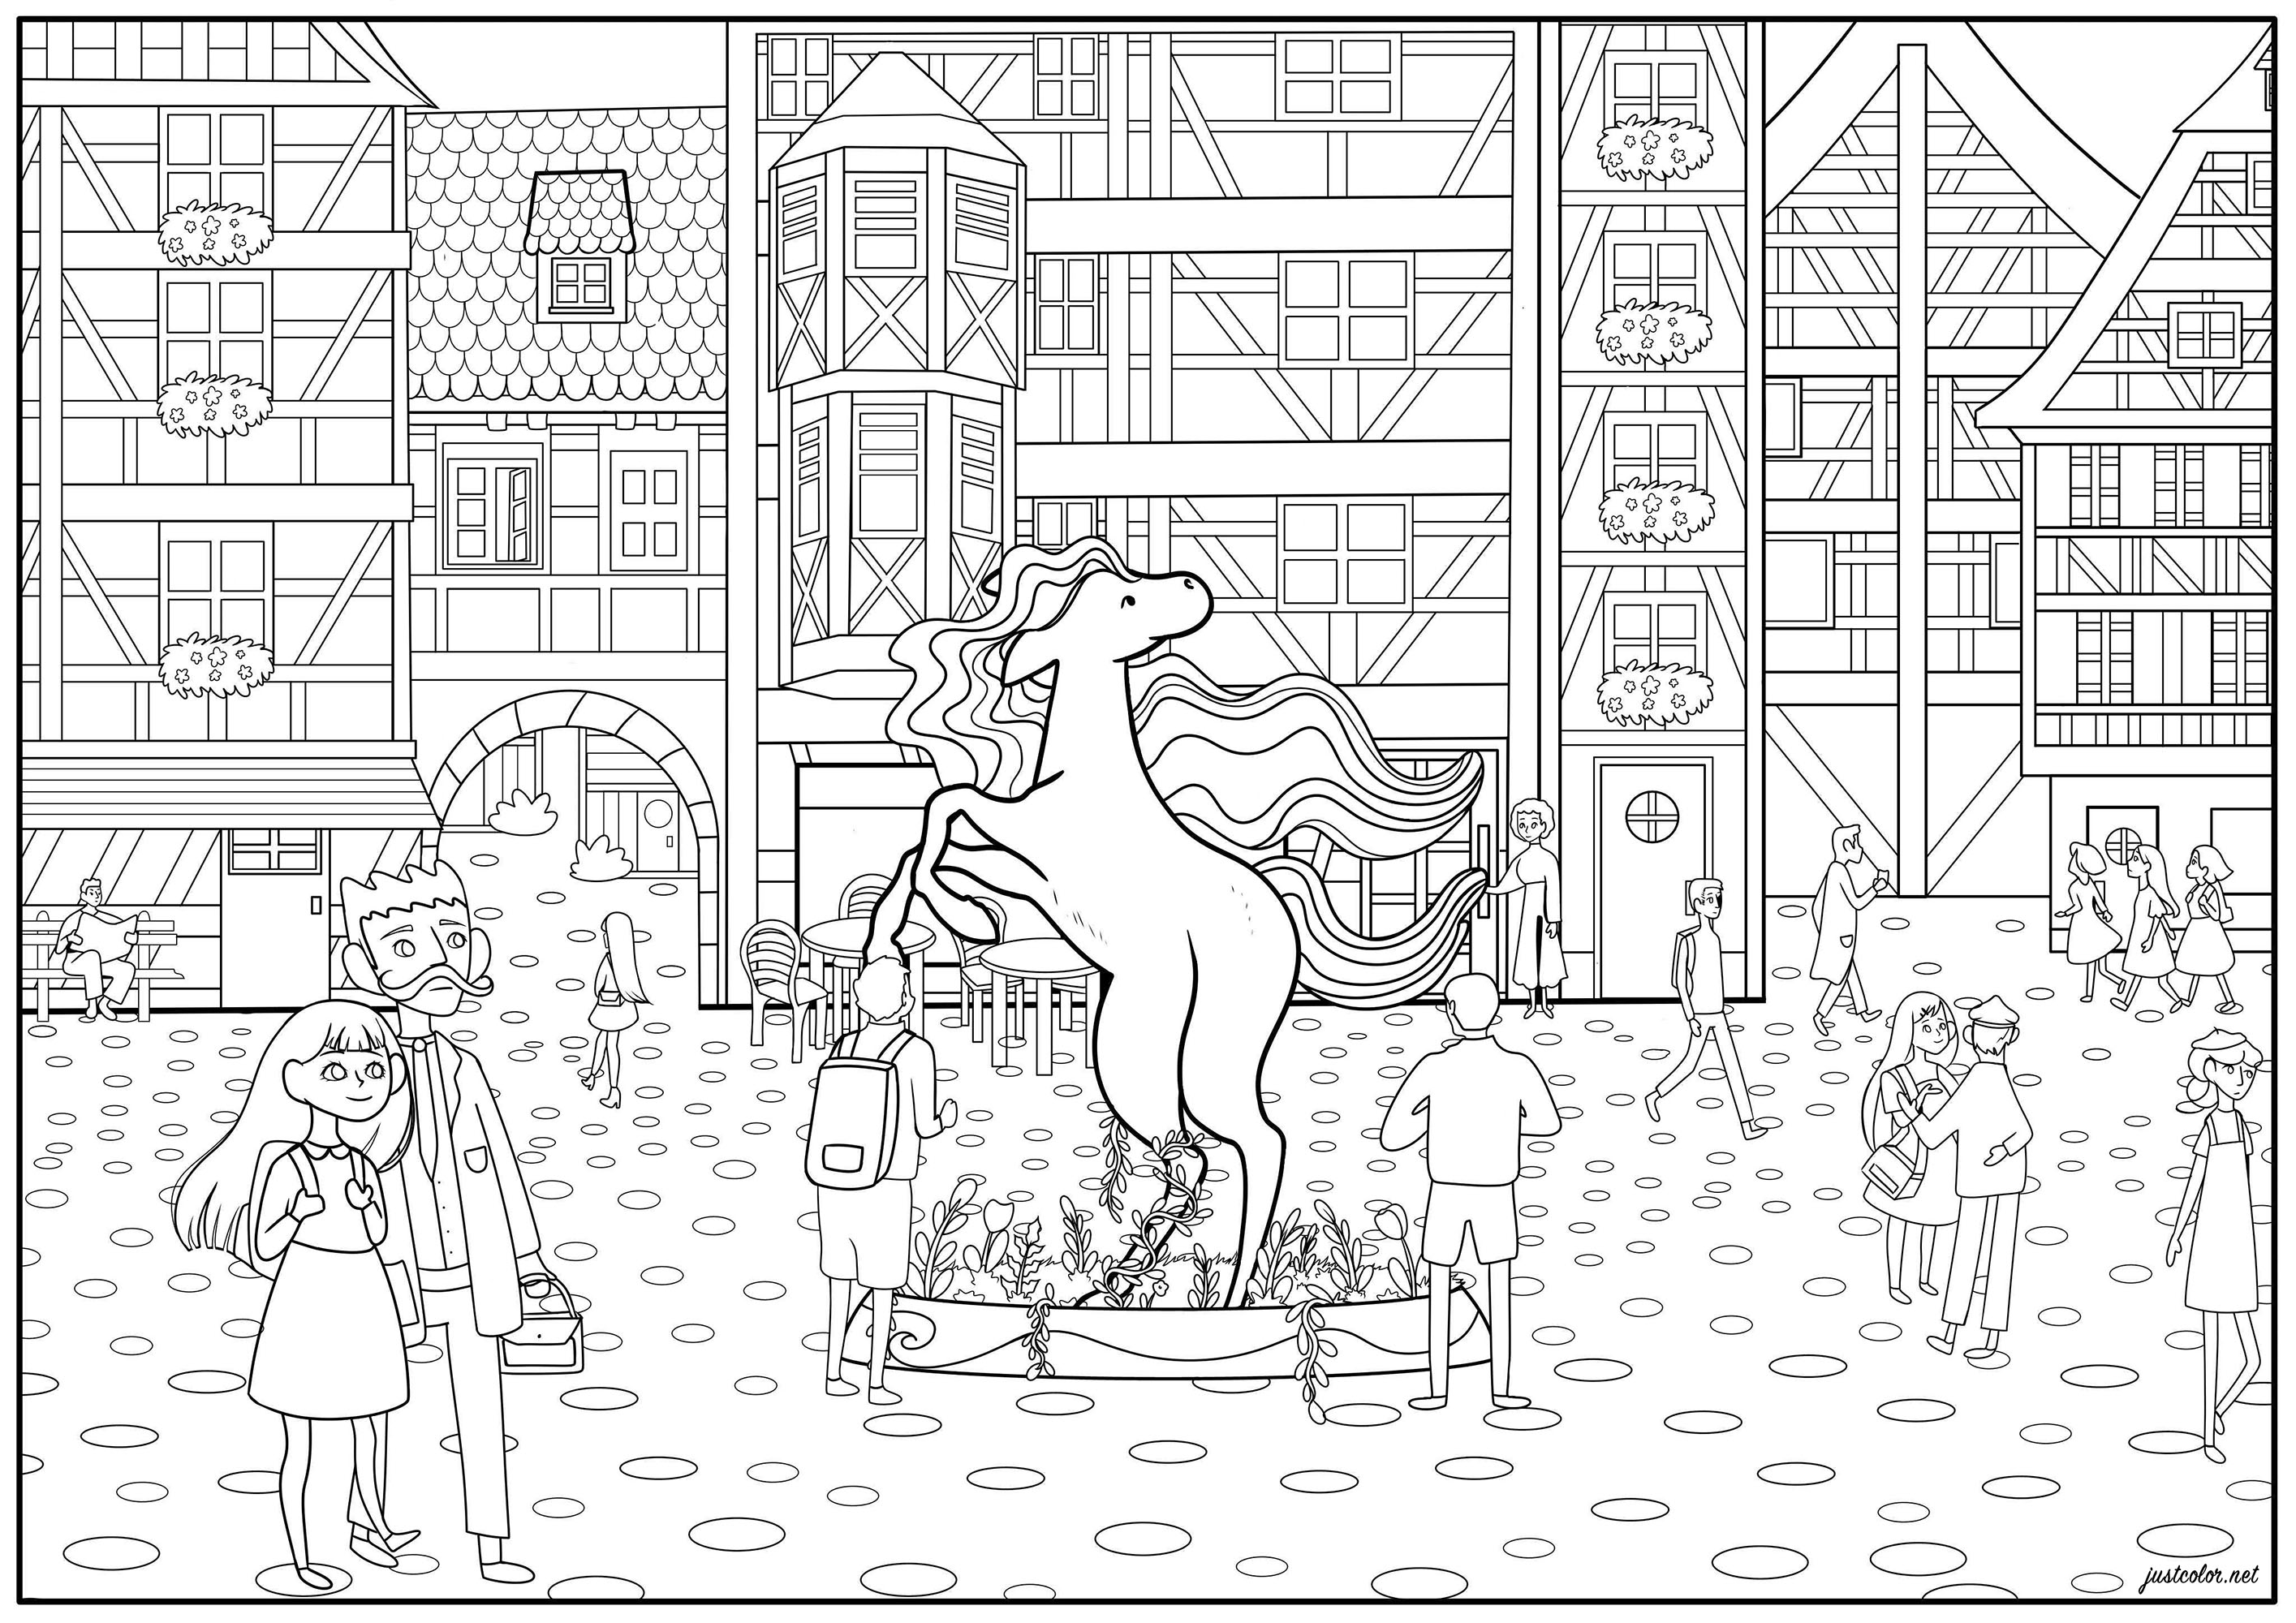 Coloring page of a sunny afternoon in a downtown with timbered houses, and an unicorn statue